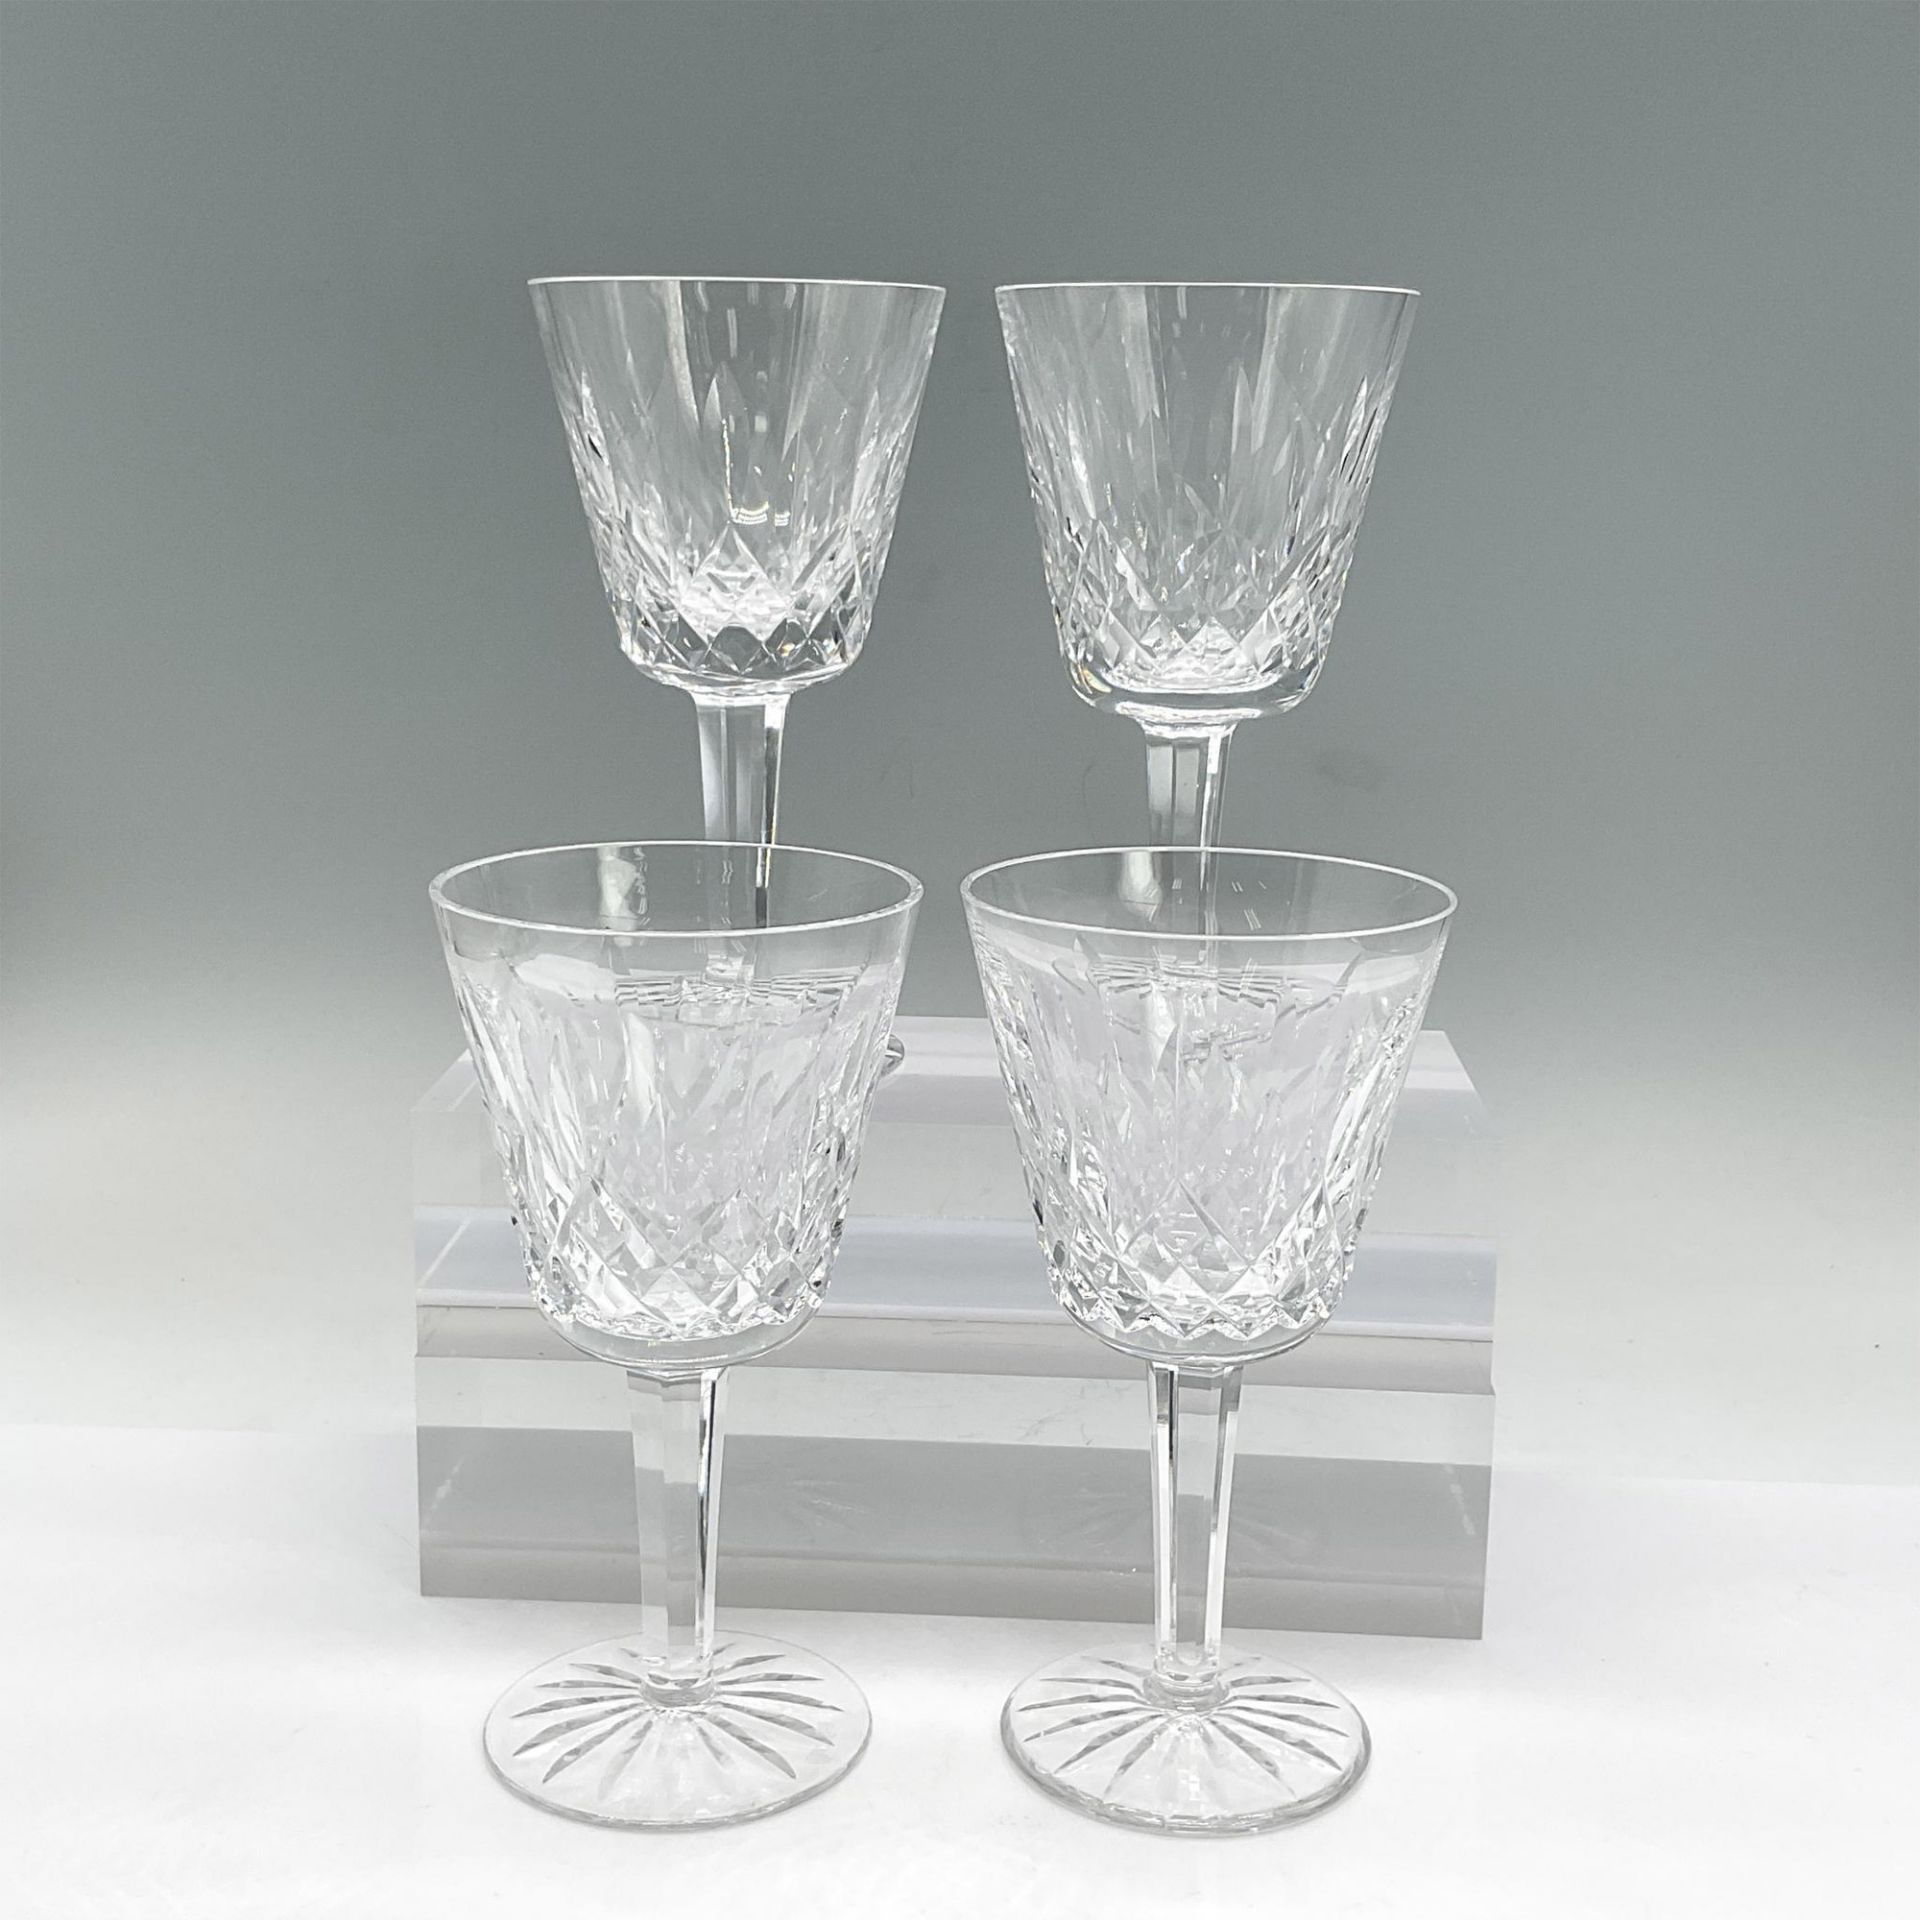 4pc Waterford Crystal Wine Glasses, Lismore